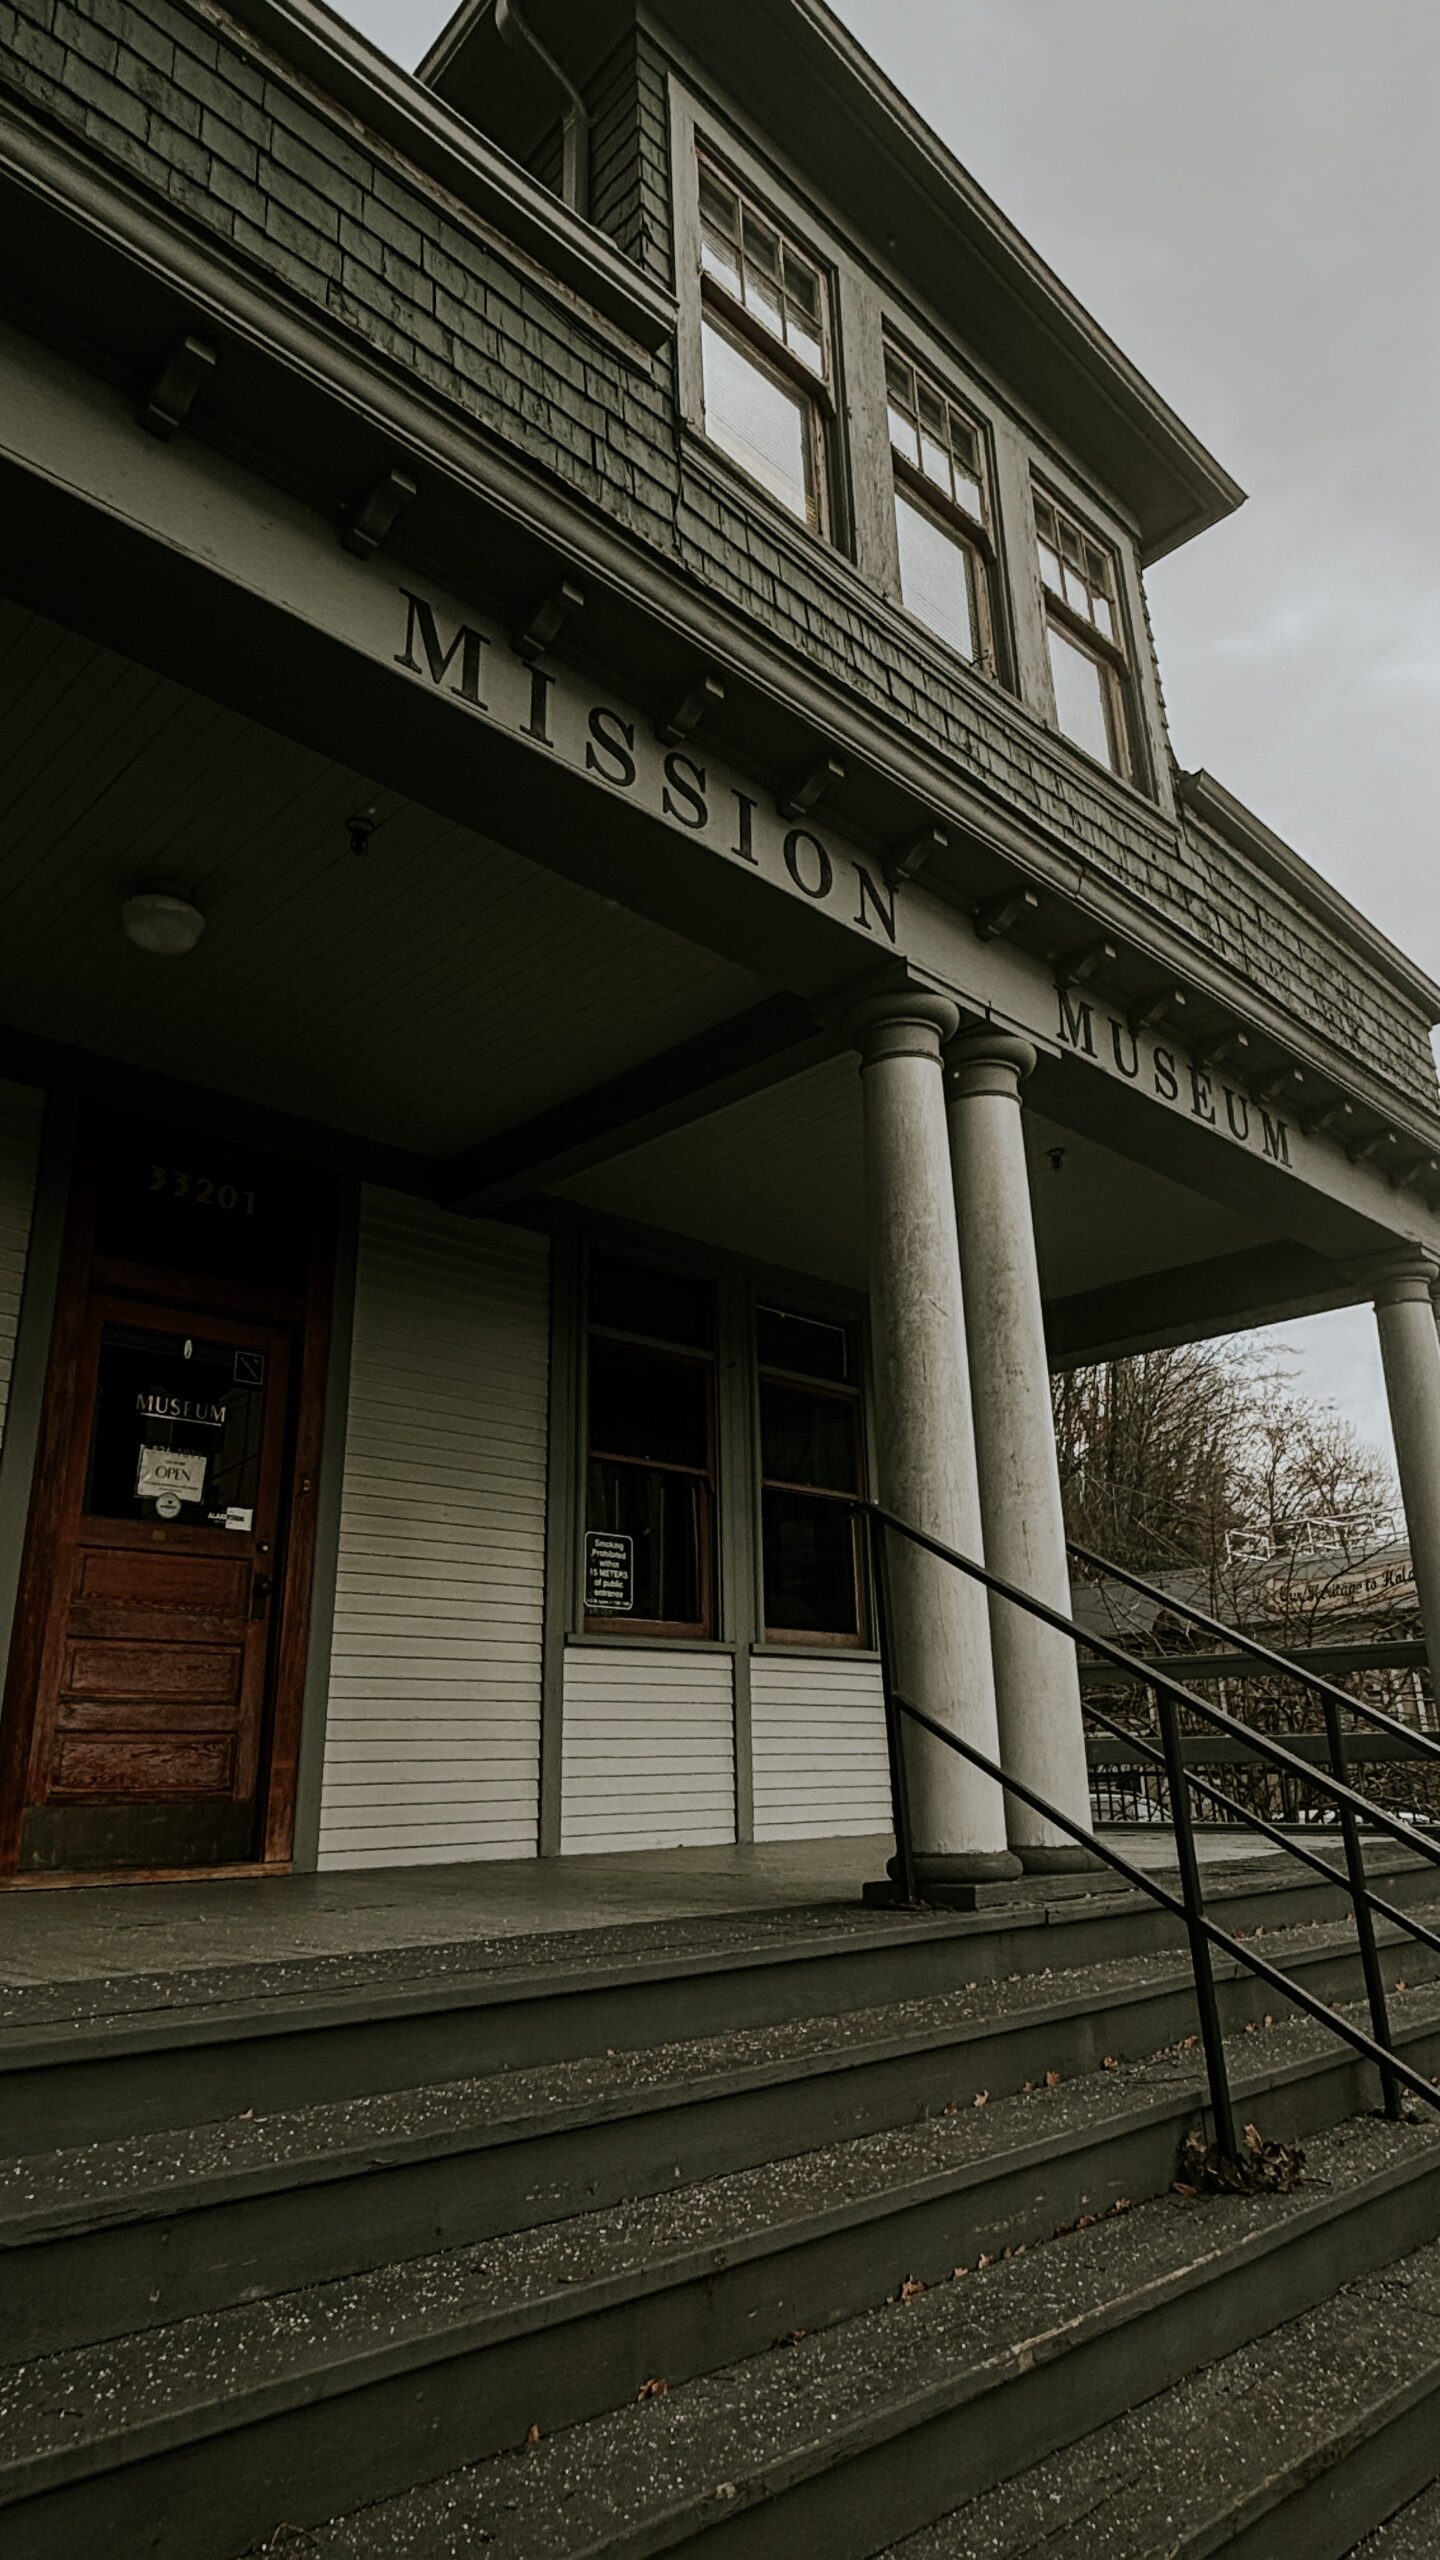 The front view of a tall building, with the words "Mission Museum" on the front.